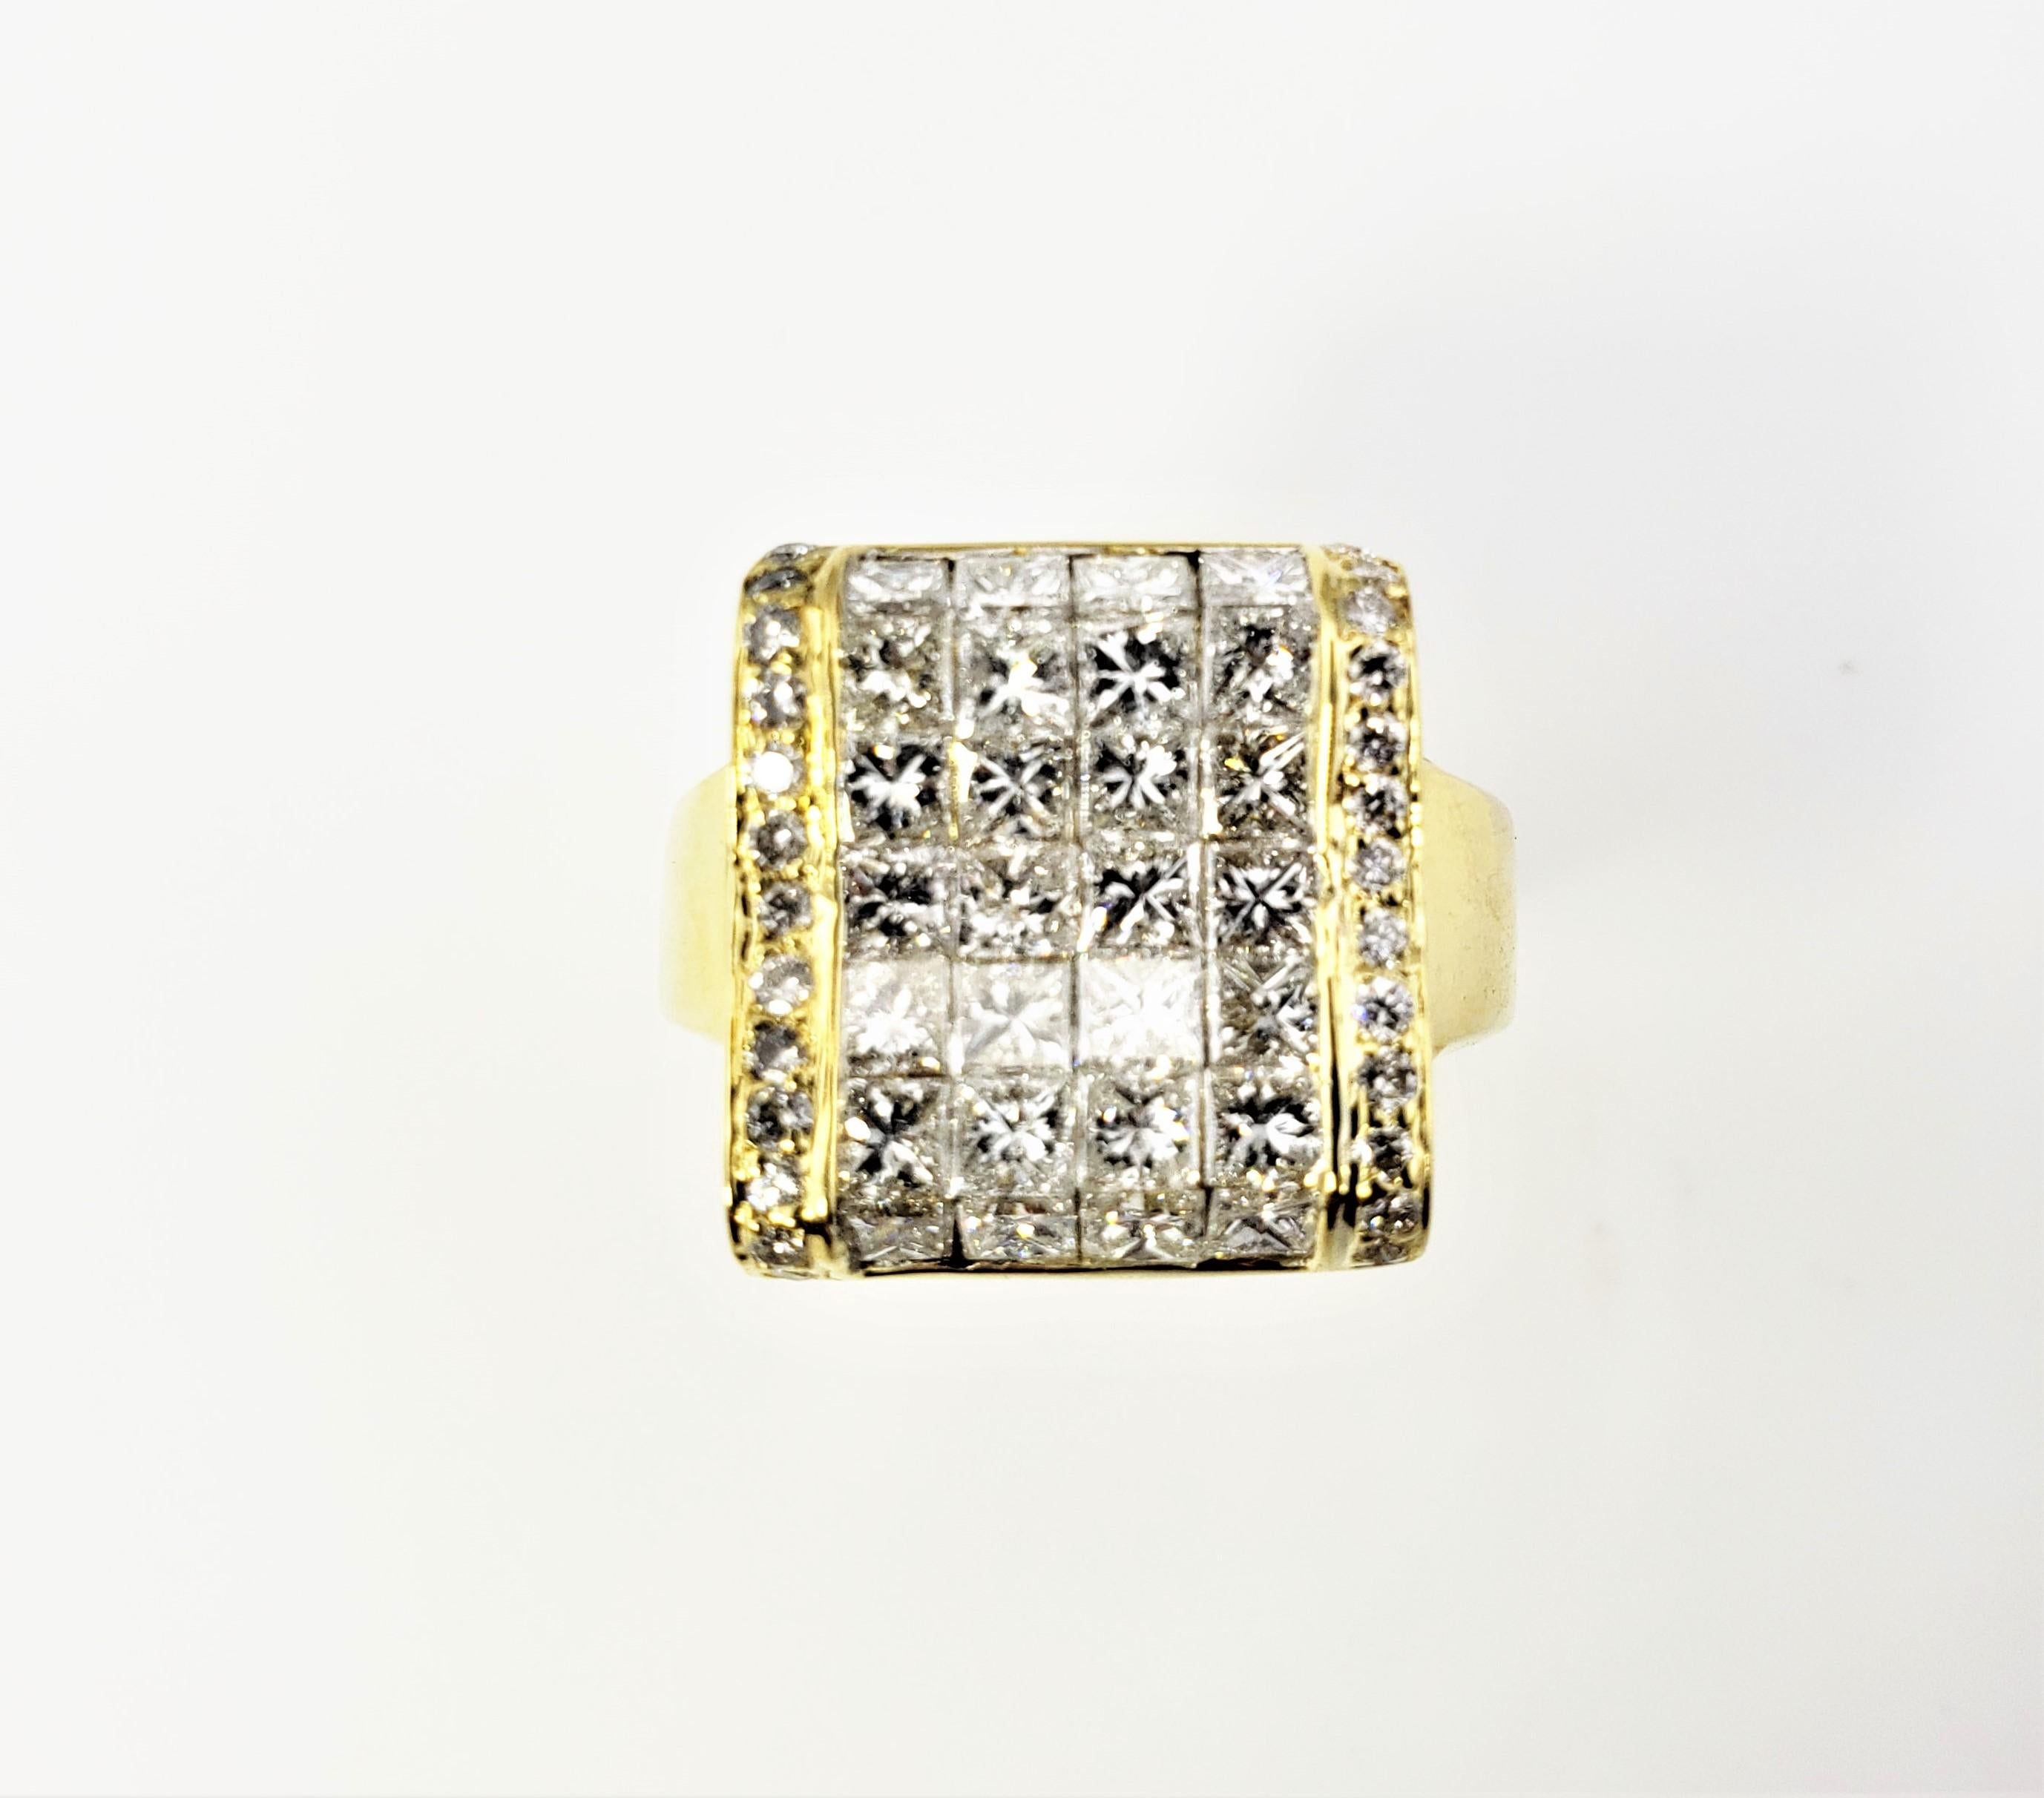 Vintage 18 Karat Yellow Gold and Diamond Ring Size 5.25 GAI Certified-

This sparkling ring features 26 round brilliant cut diamonds and 28 princess cut diamonds set in elegant 18K yellow gold.  Top of ring measures 17 mm x 15 mm.  Shank measures 4